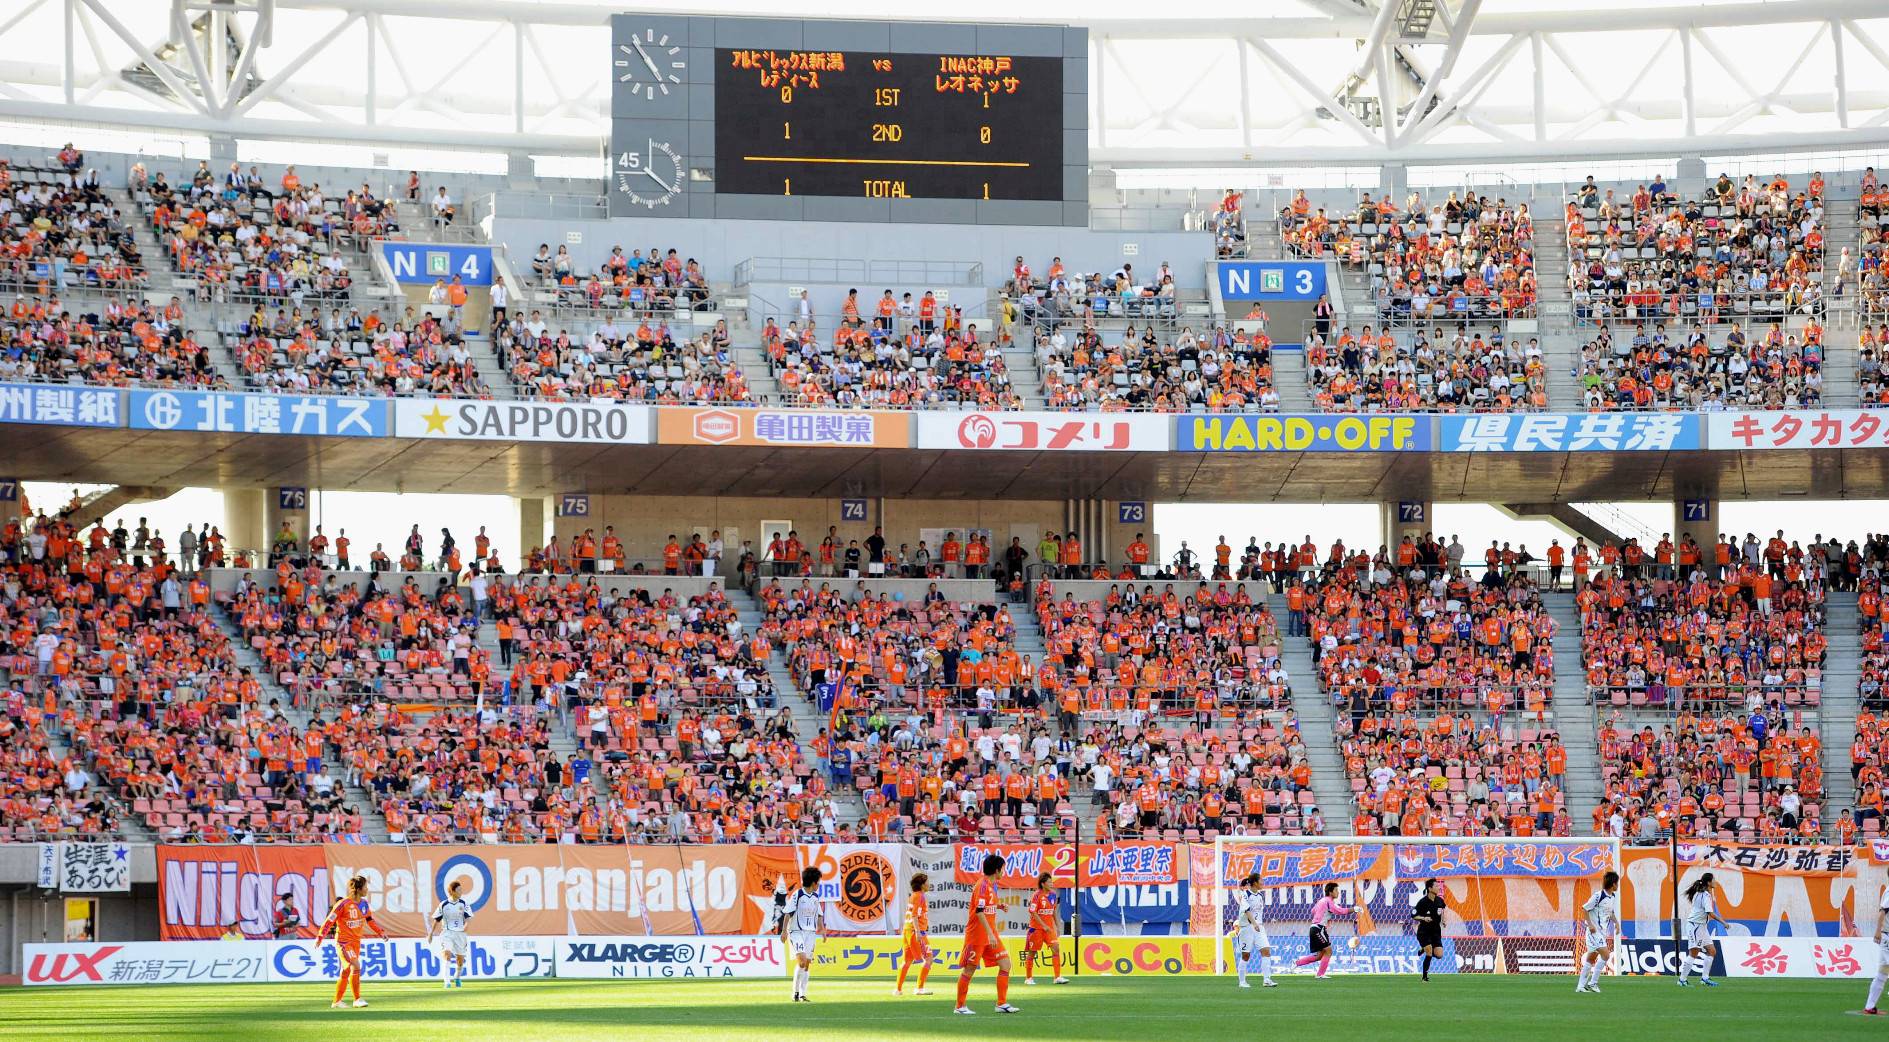 Albirex Ladies and INAC play a Nadeshiko League game at Denka Swan Stadium in Niigata on Aug. 6, 2011, as part of a doubleheader with the J. League's Albirex and S-Pulse. WE League Chair Kikuko Okajima hopes to schedule similar doubleheaders with WE League and J. League clubs. | KYODO